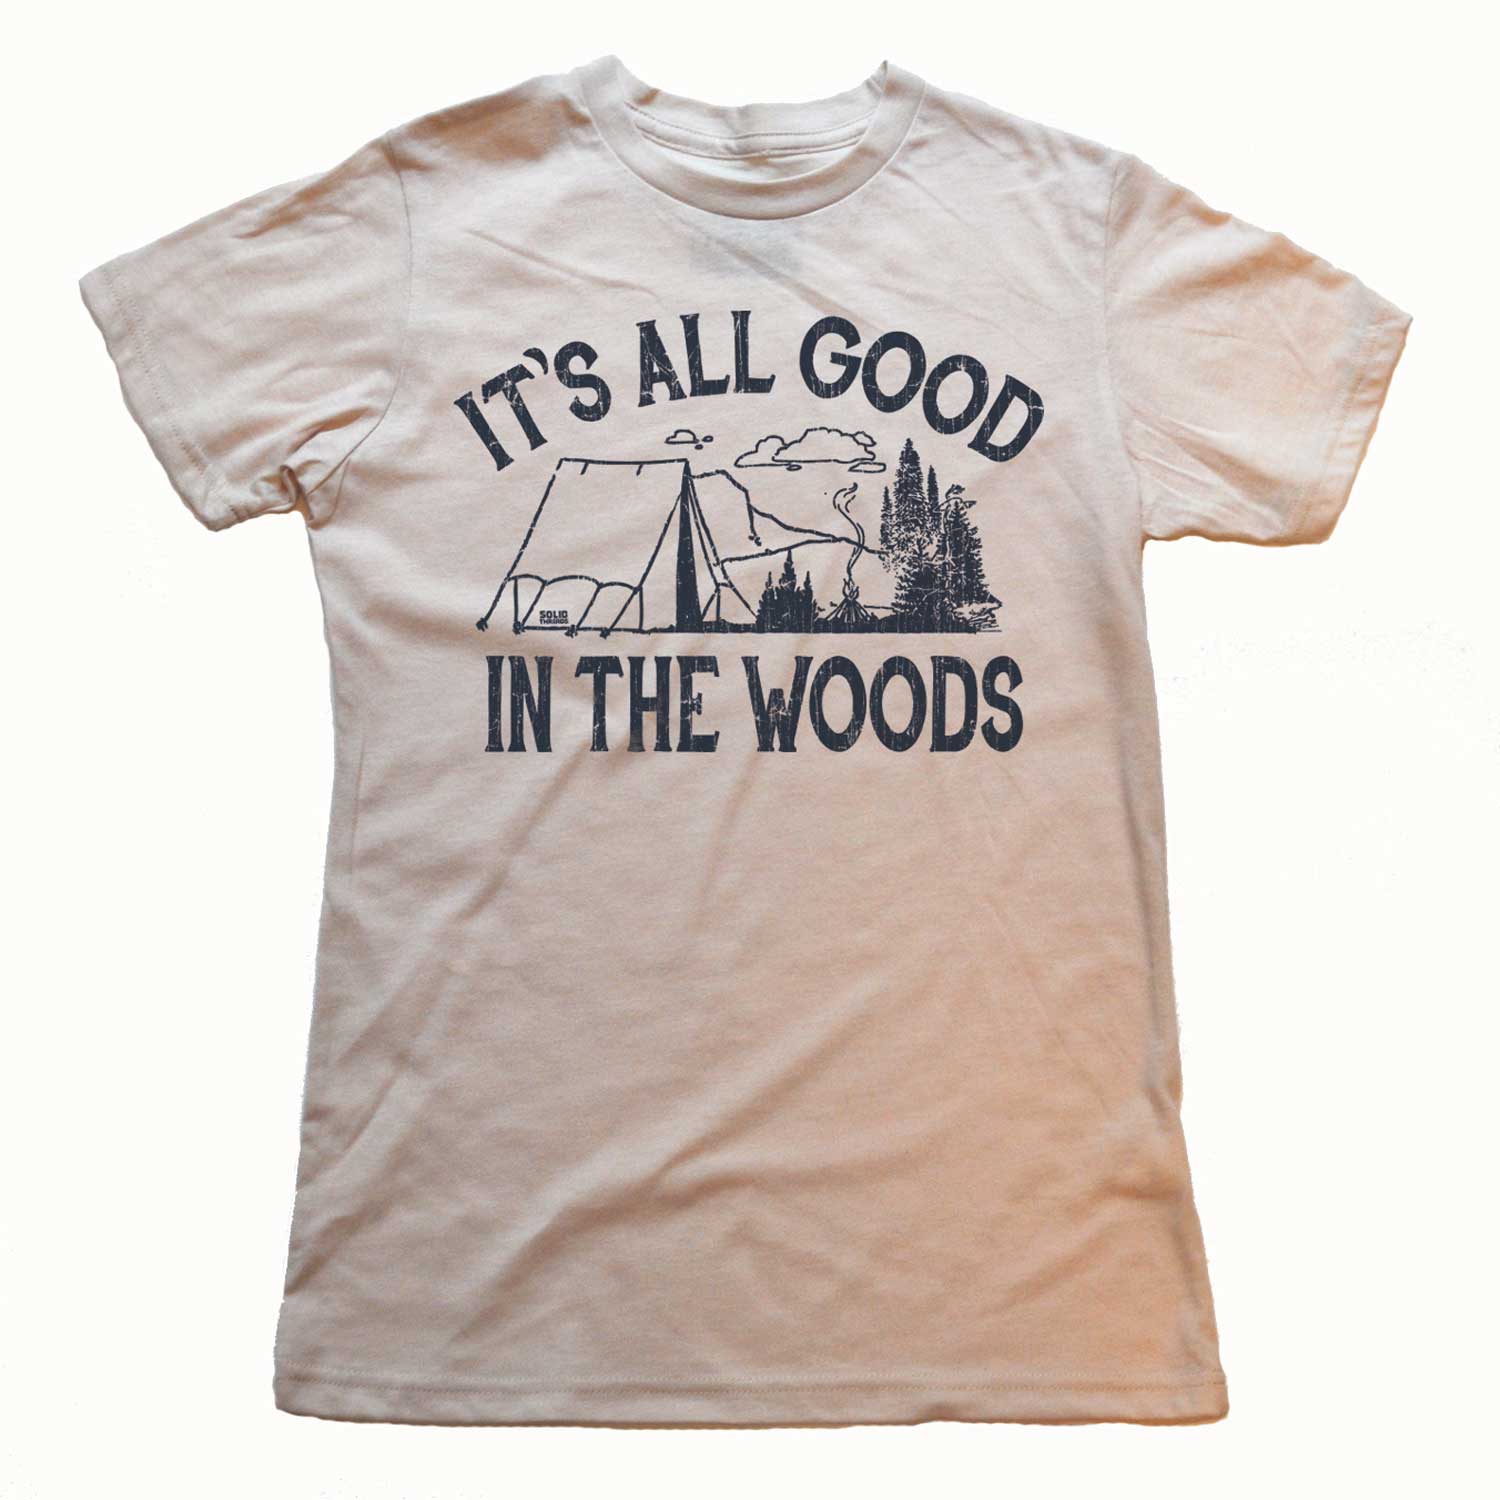 https://cdn.shopify.com/s/files/1/1670/8045/products/womens_its_all_good_in_the_woods_graphic_crop_top_retro_camping_t_shirt_solid_threads_1600x.jpg?v=1622915418